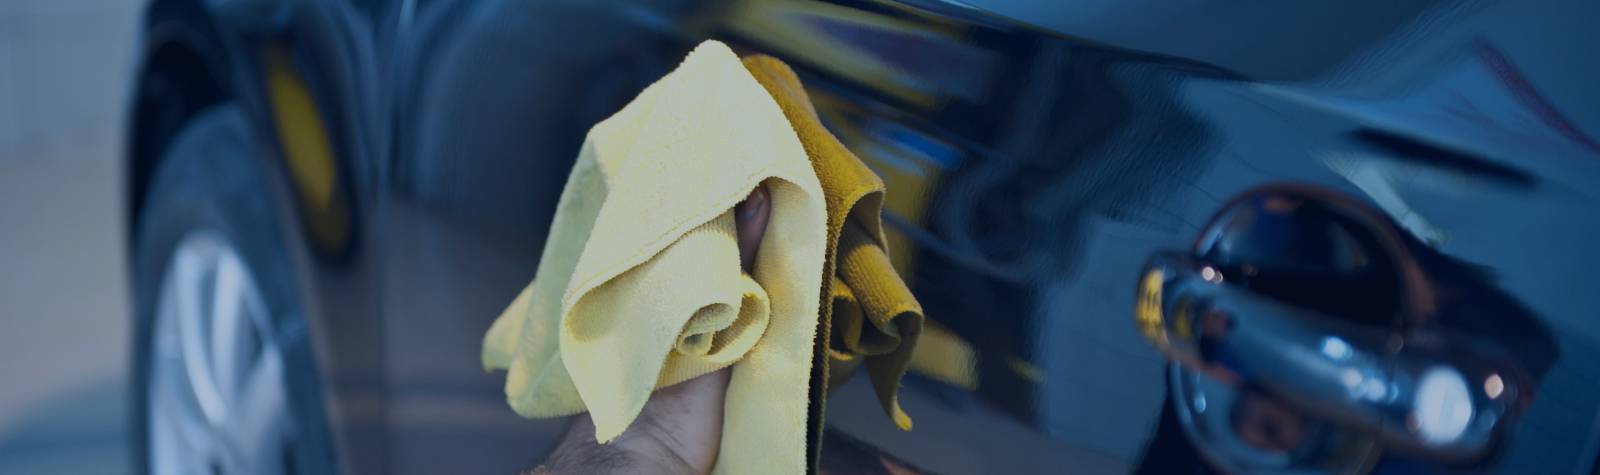 Tips and Tricks for Keeping Your Car Looking Pristine